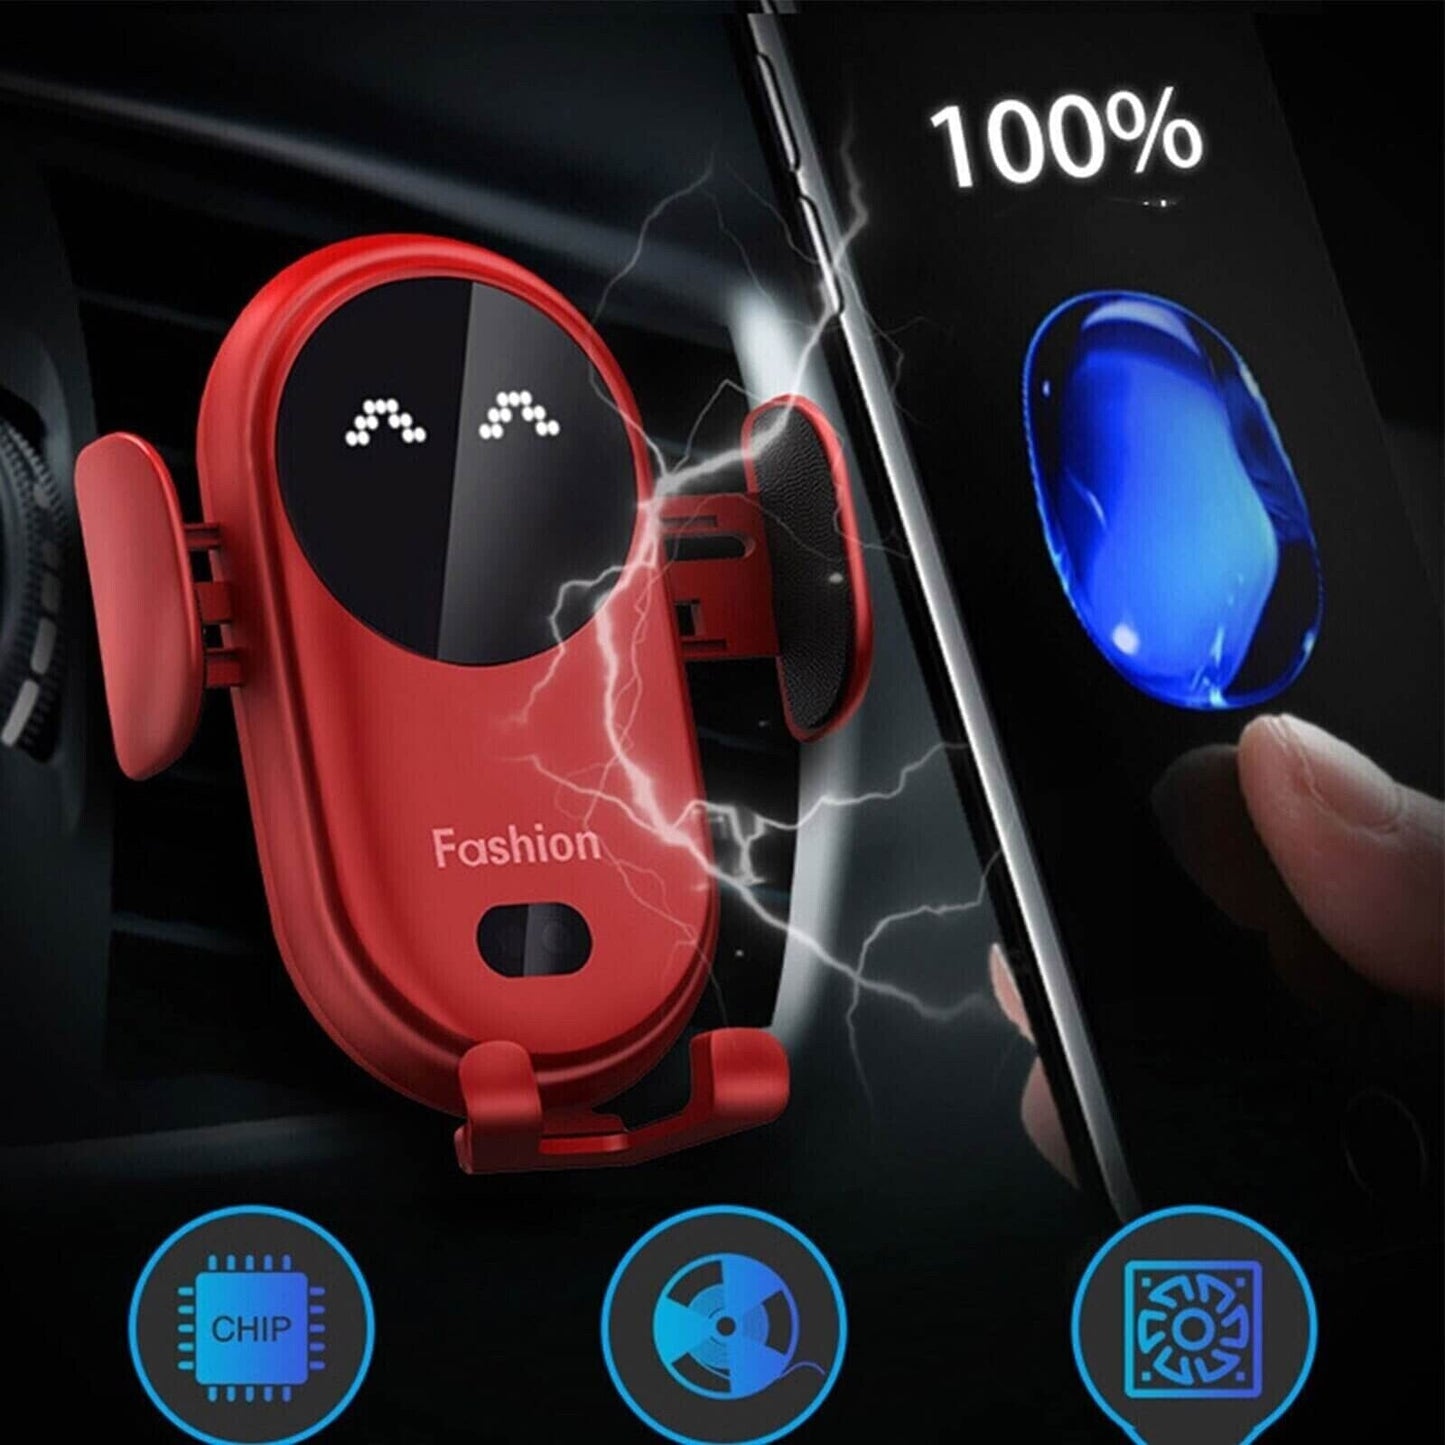 (🔥 Hot Sale🔥) Smart Car Wireless Charger Phone Holder